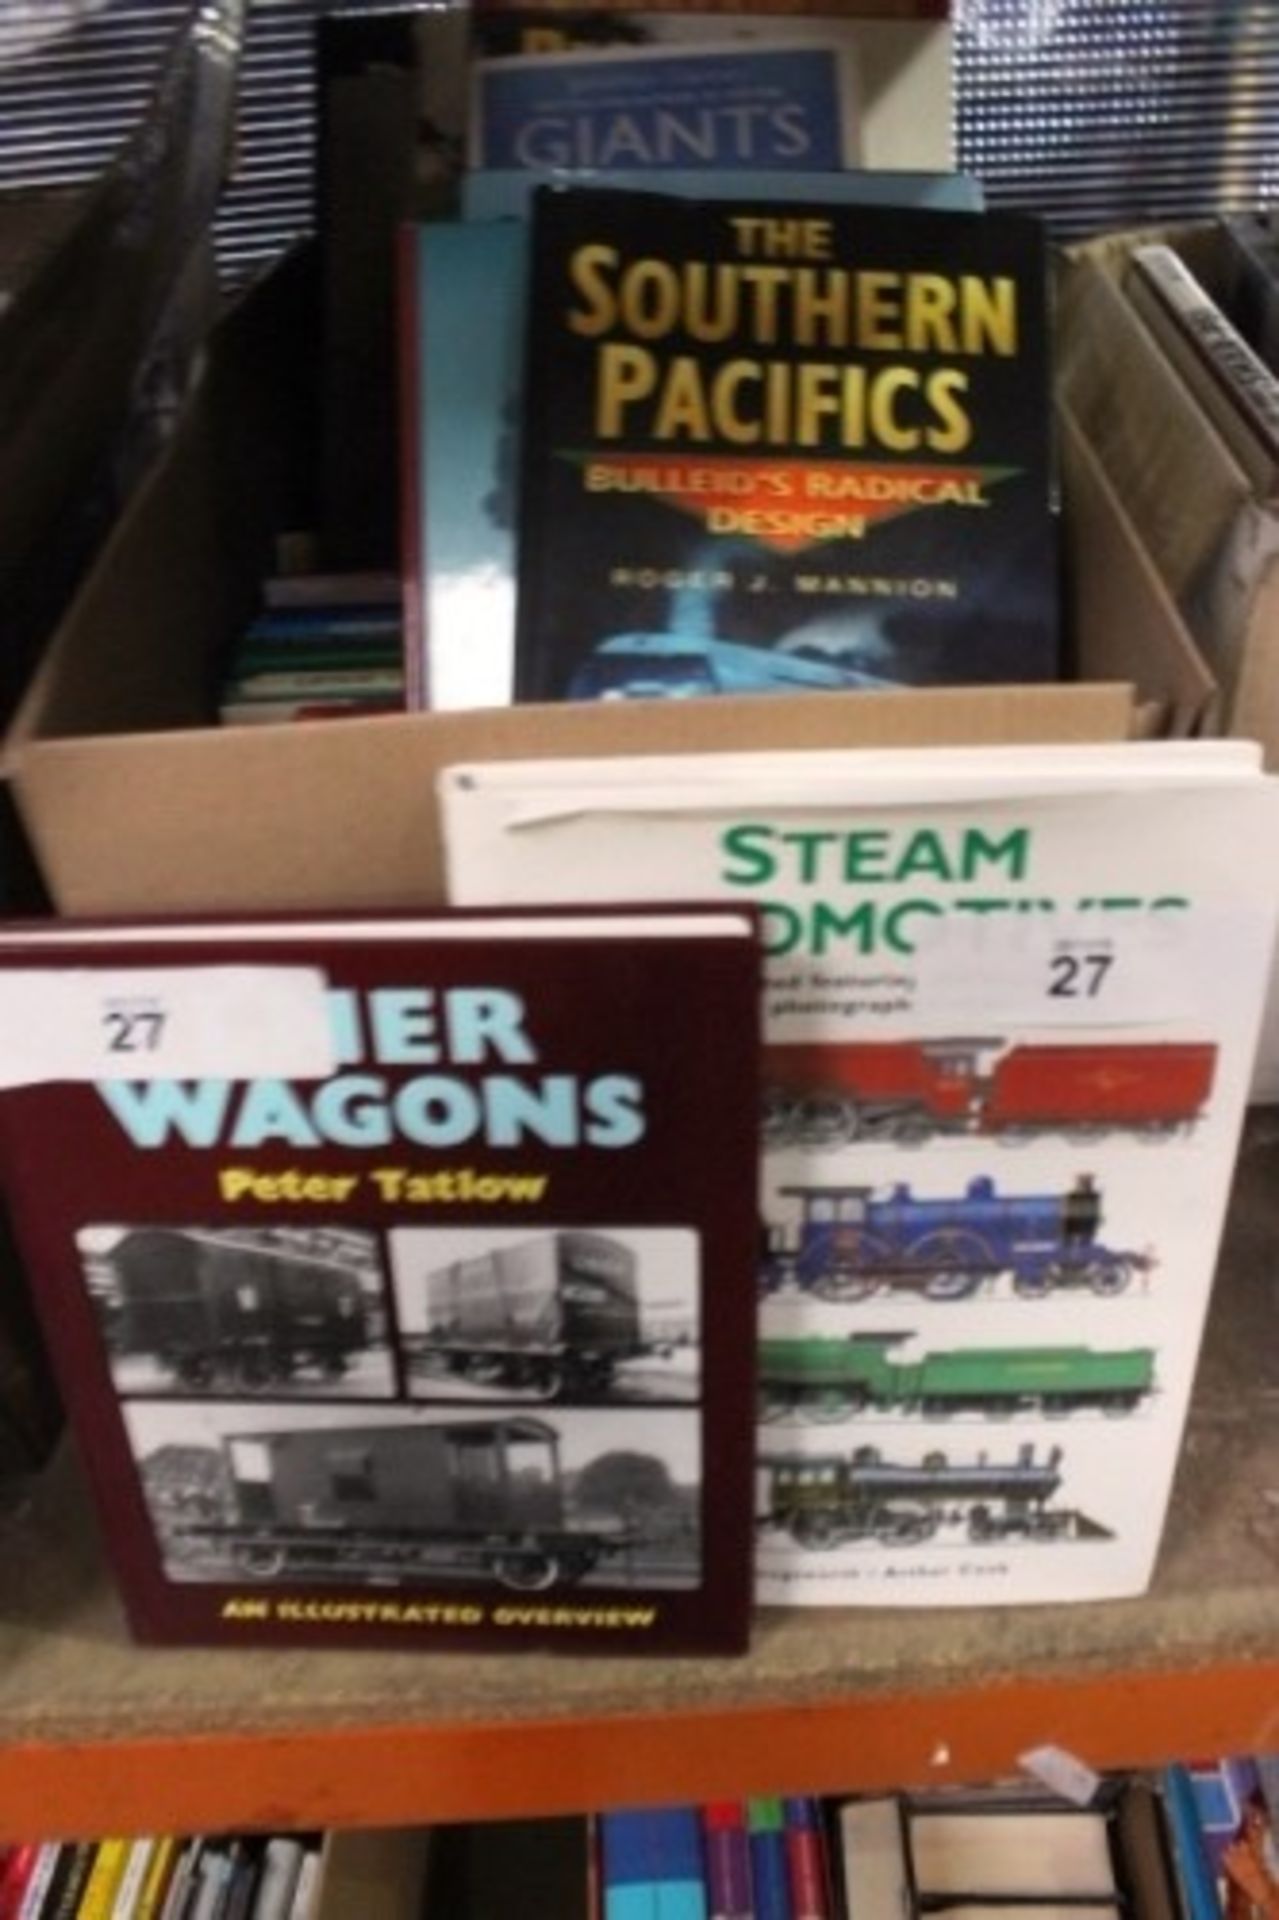 A quantity of railway and train related books - Second hand (26)